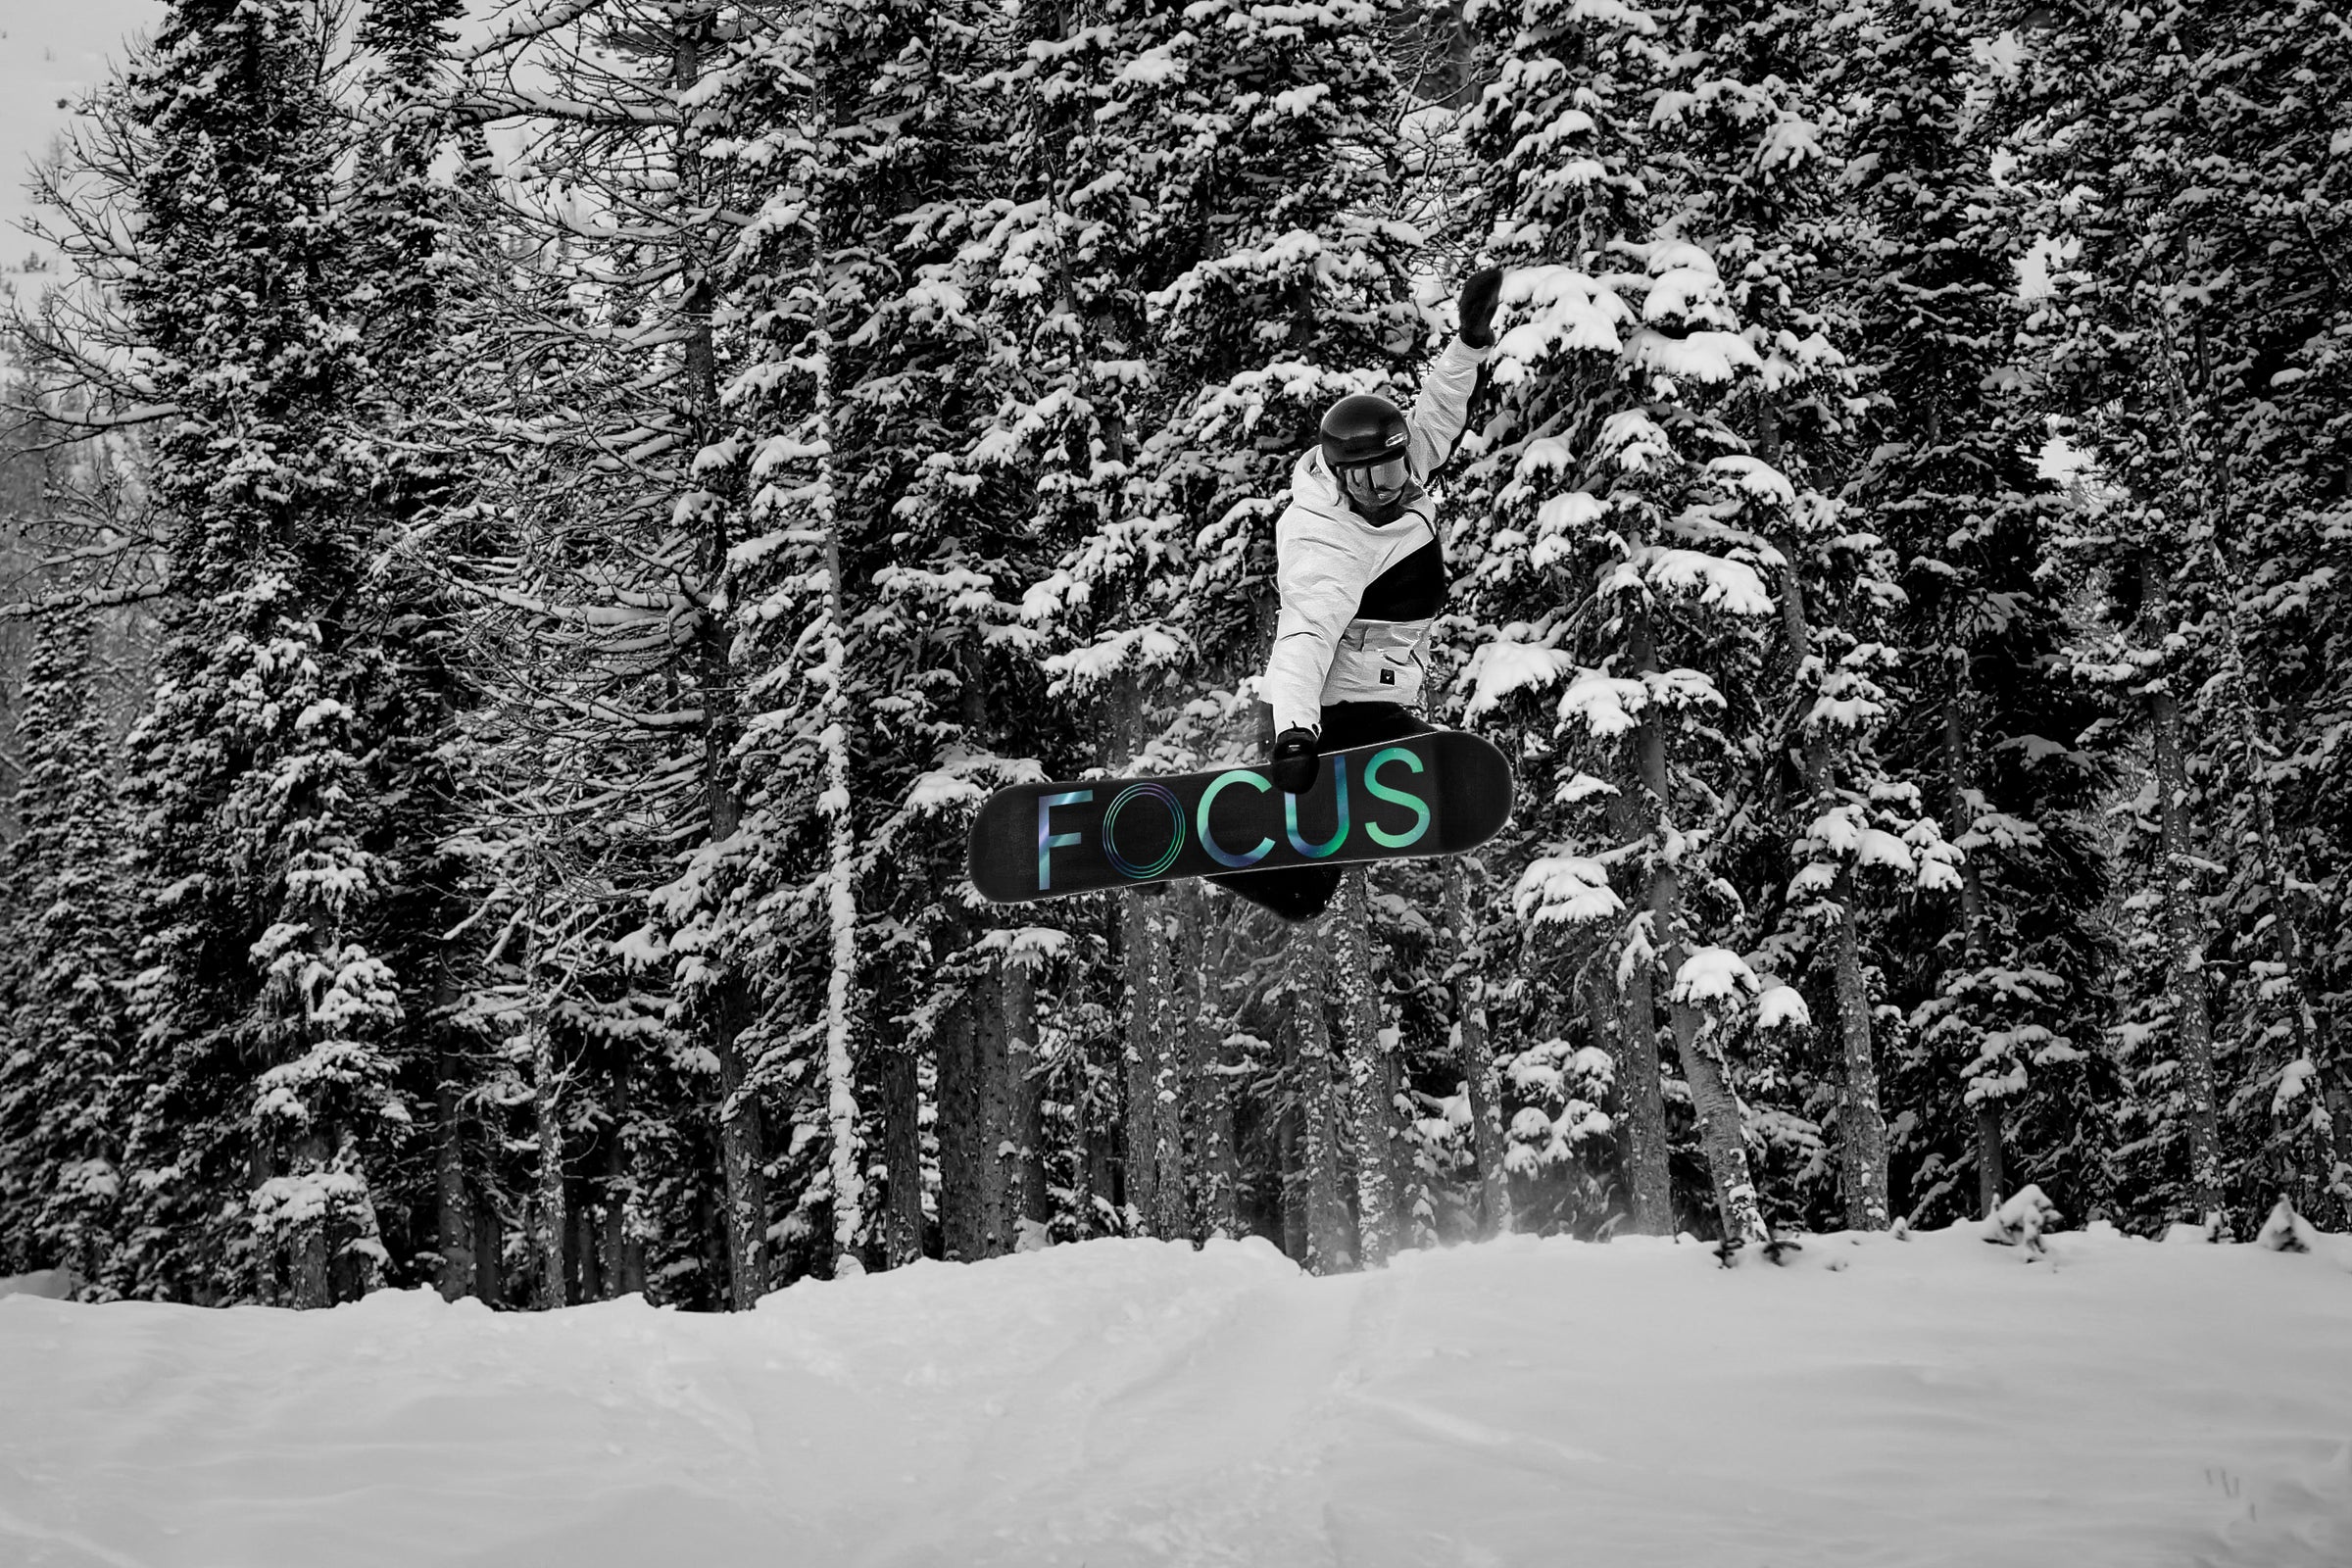 method grab on the Reason, the best all mountain snowboard in the Rockies with Focus Snowboards, Banff's first snowboarding company.